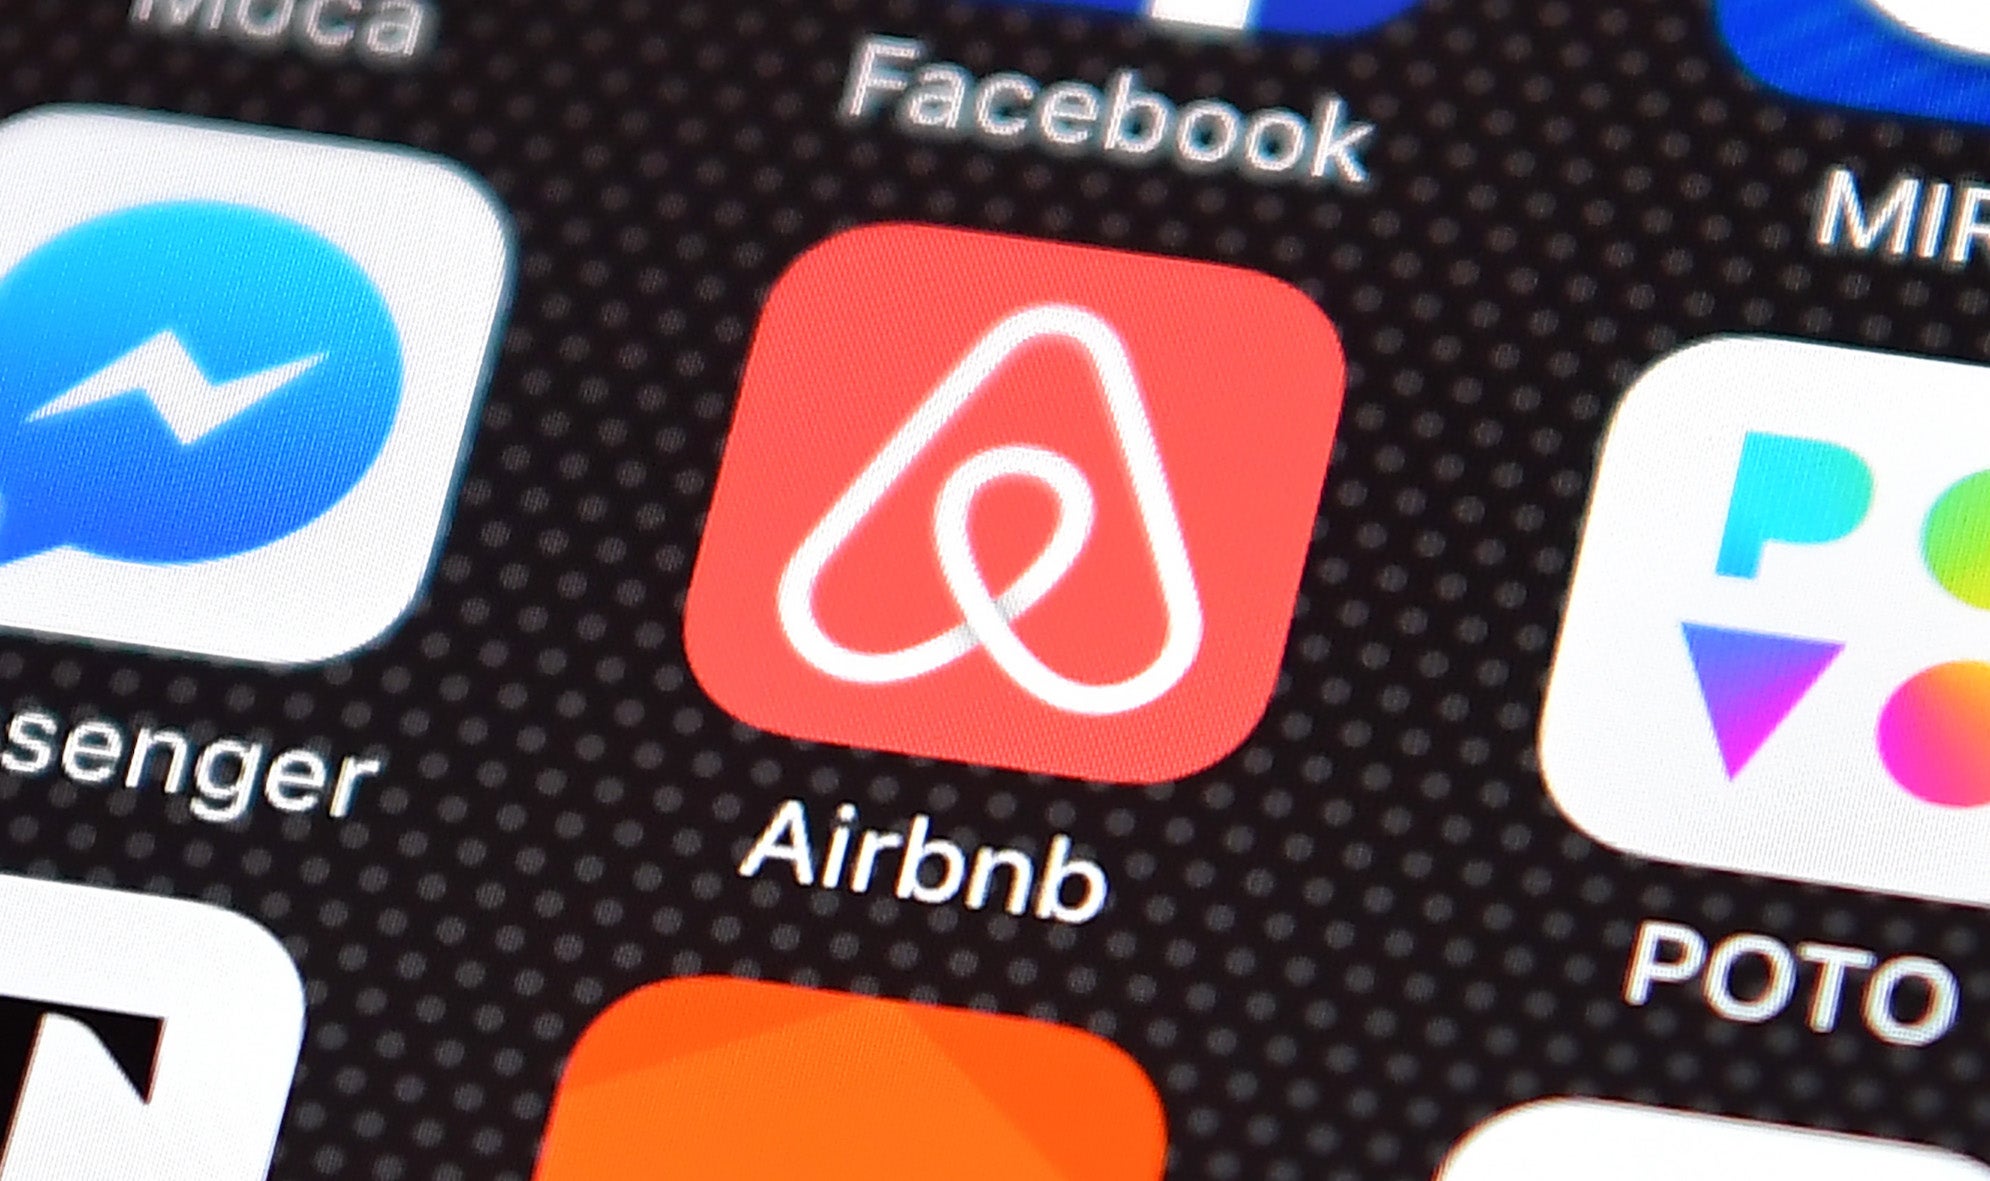 The 36-year-old was found dead in front of the Airbnb property a week after arriving